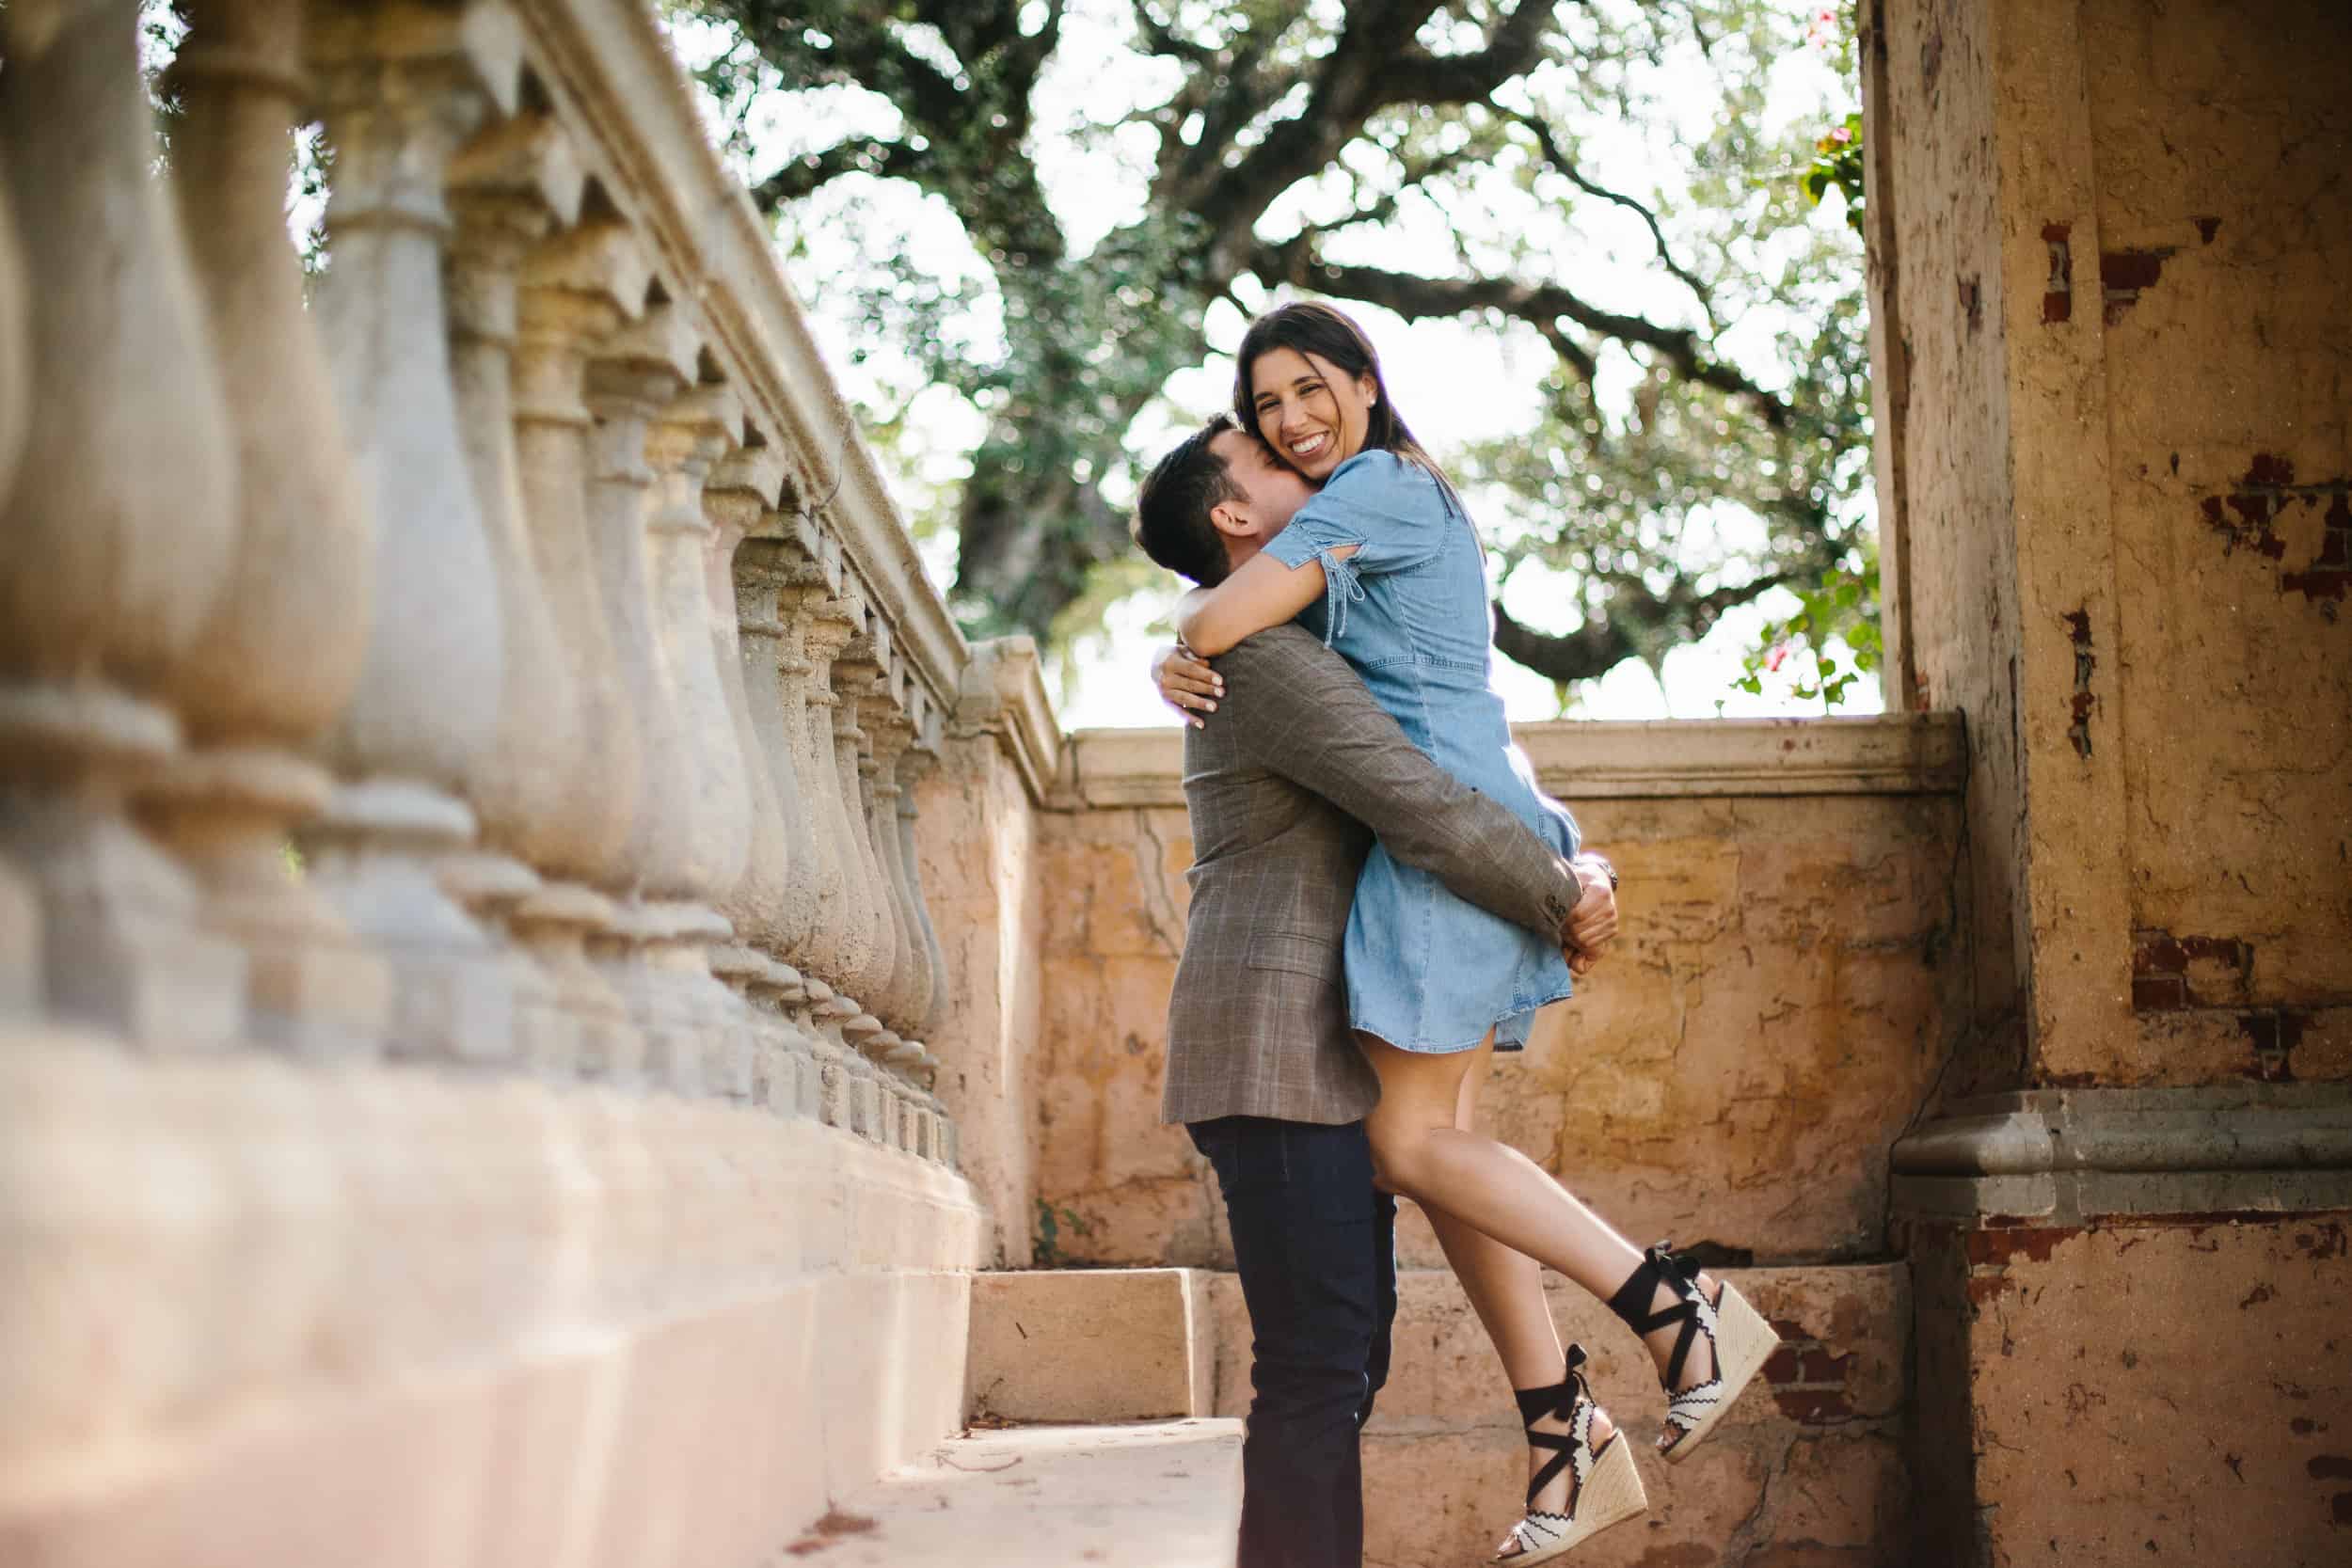 Engagement session at Country Club Prado Entrance, Coral Gables